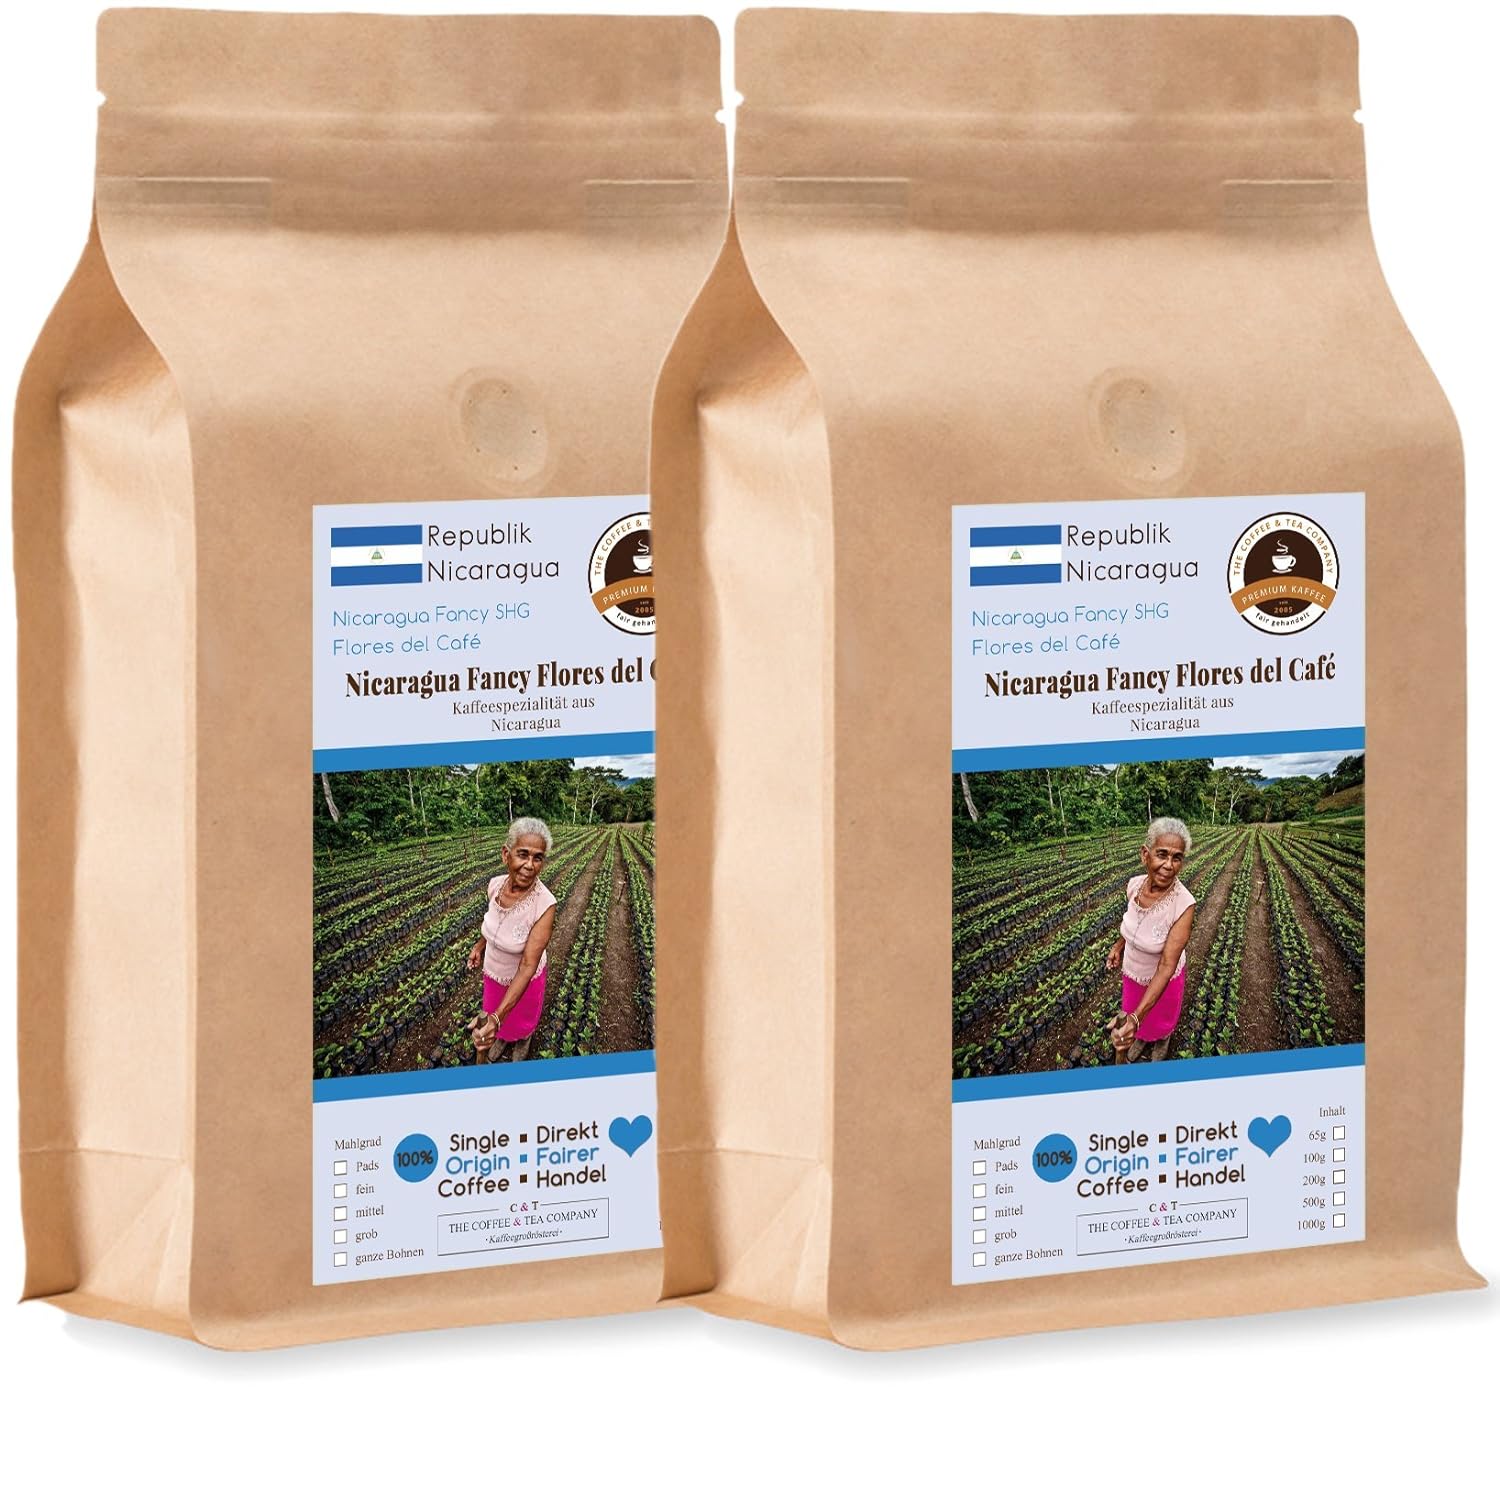 Coffee Globetrotter - Coffee with Heart - Nicaragua Fancy Flores del Café - 2 x 1000 g Whole Bean - for Fully Automatic Coffee Grinder - Roasted Coffee Fair Trade | Refill Pack Economy Pack